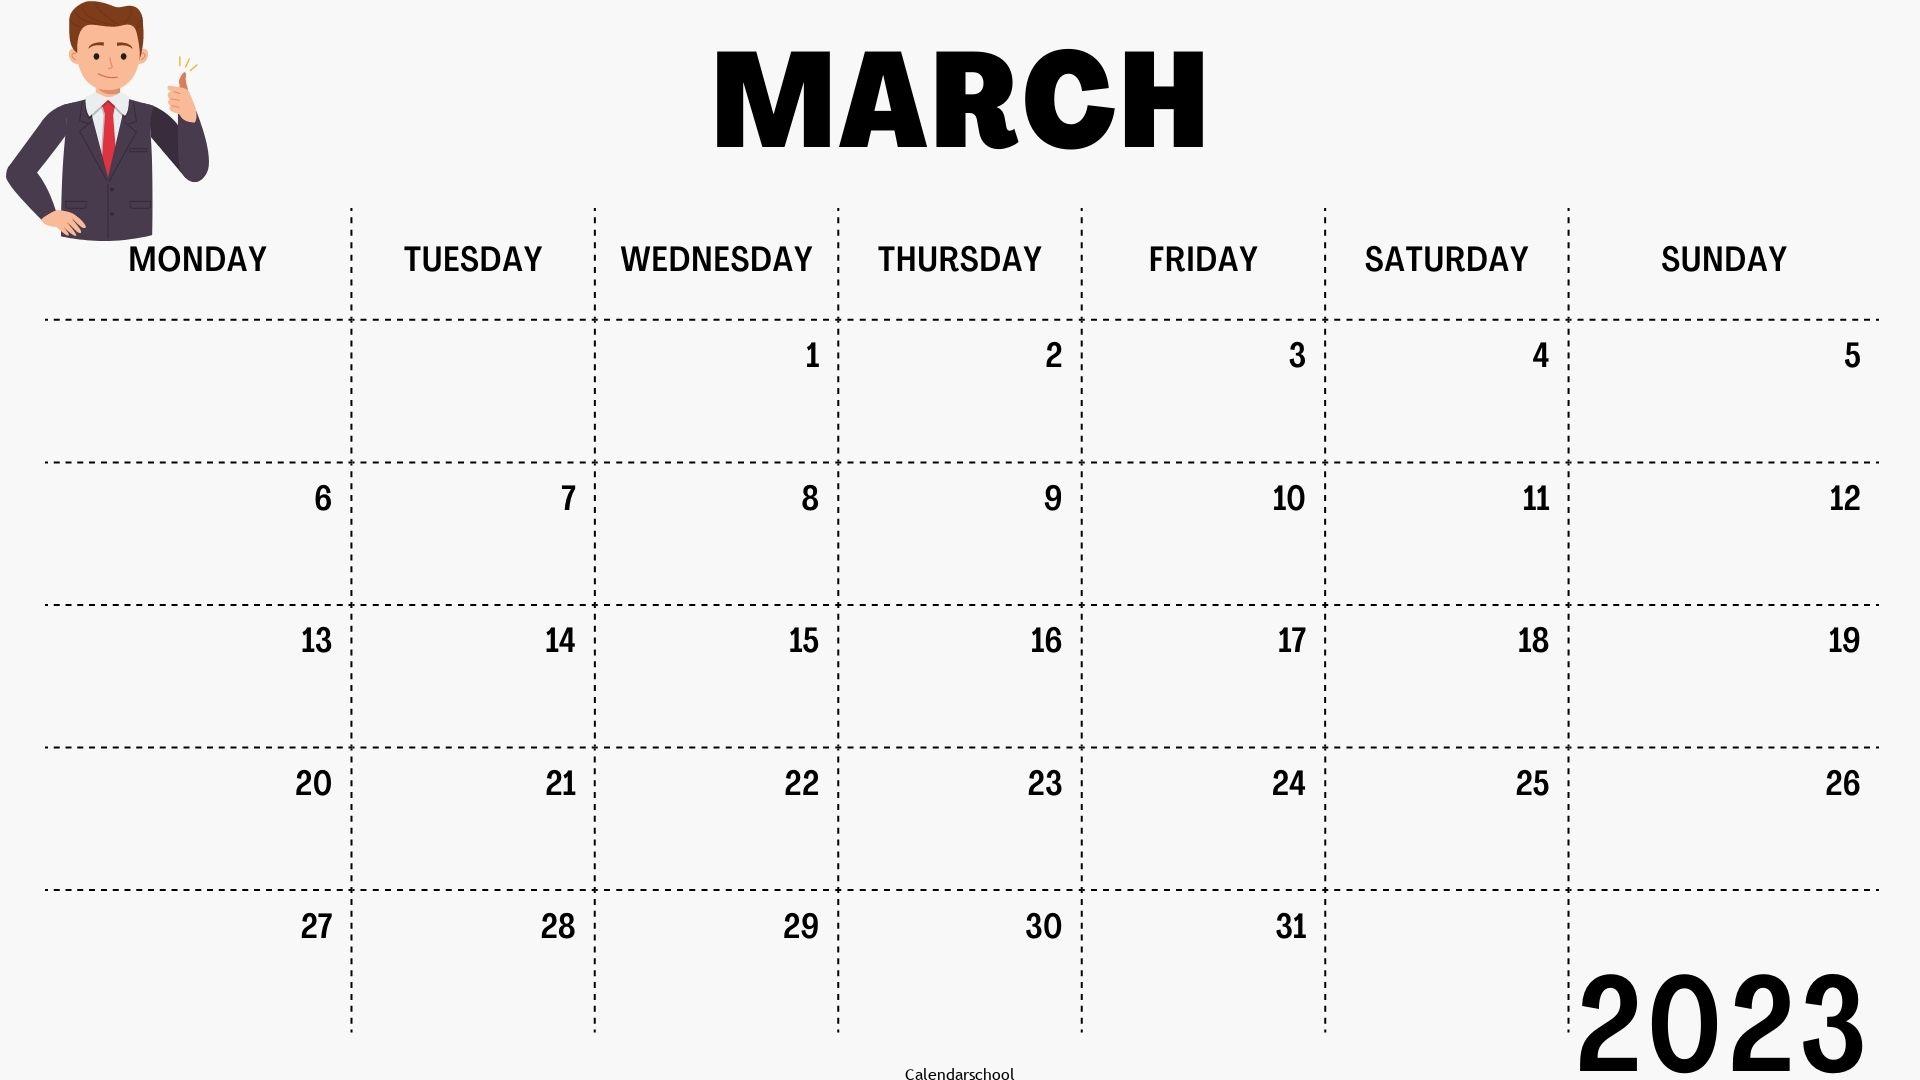 Calendar March 2023 With Holidays